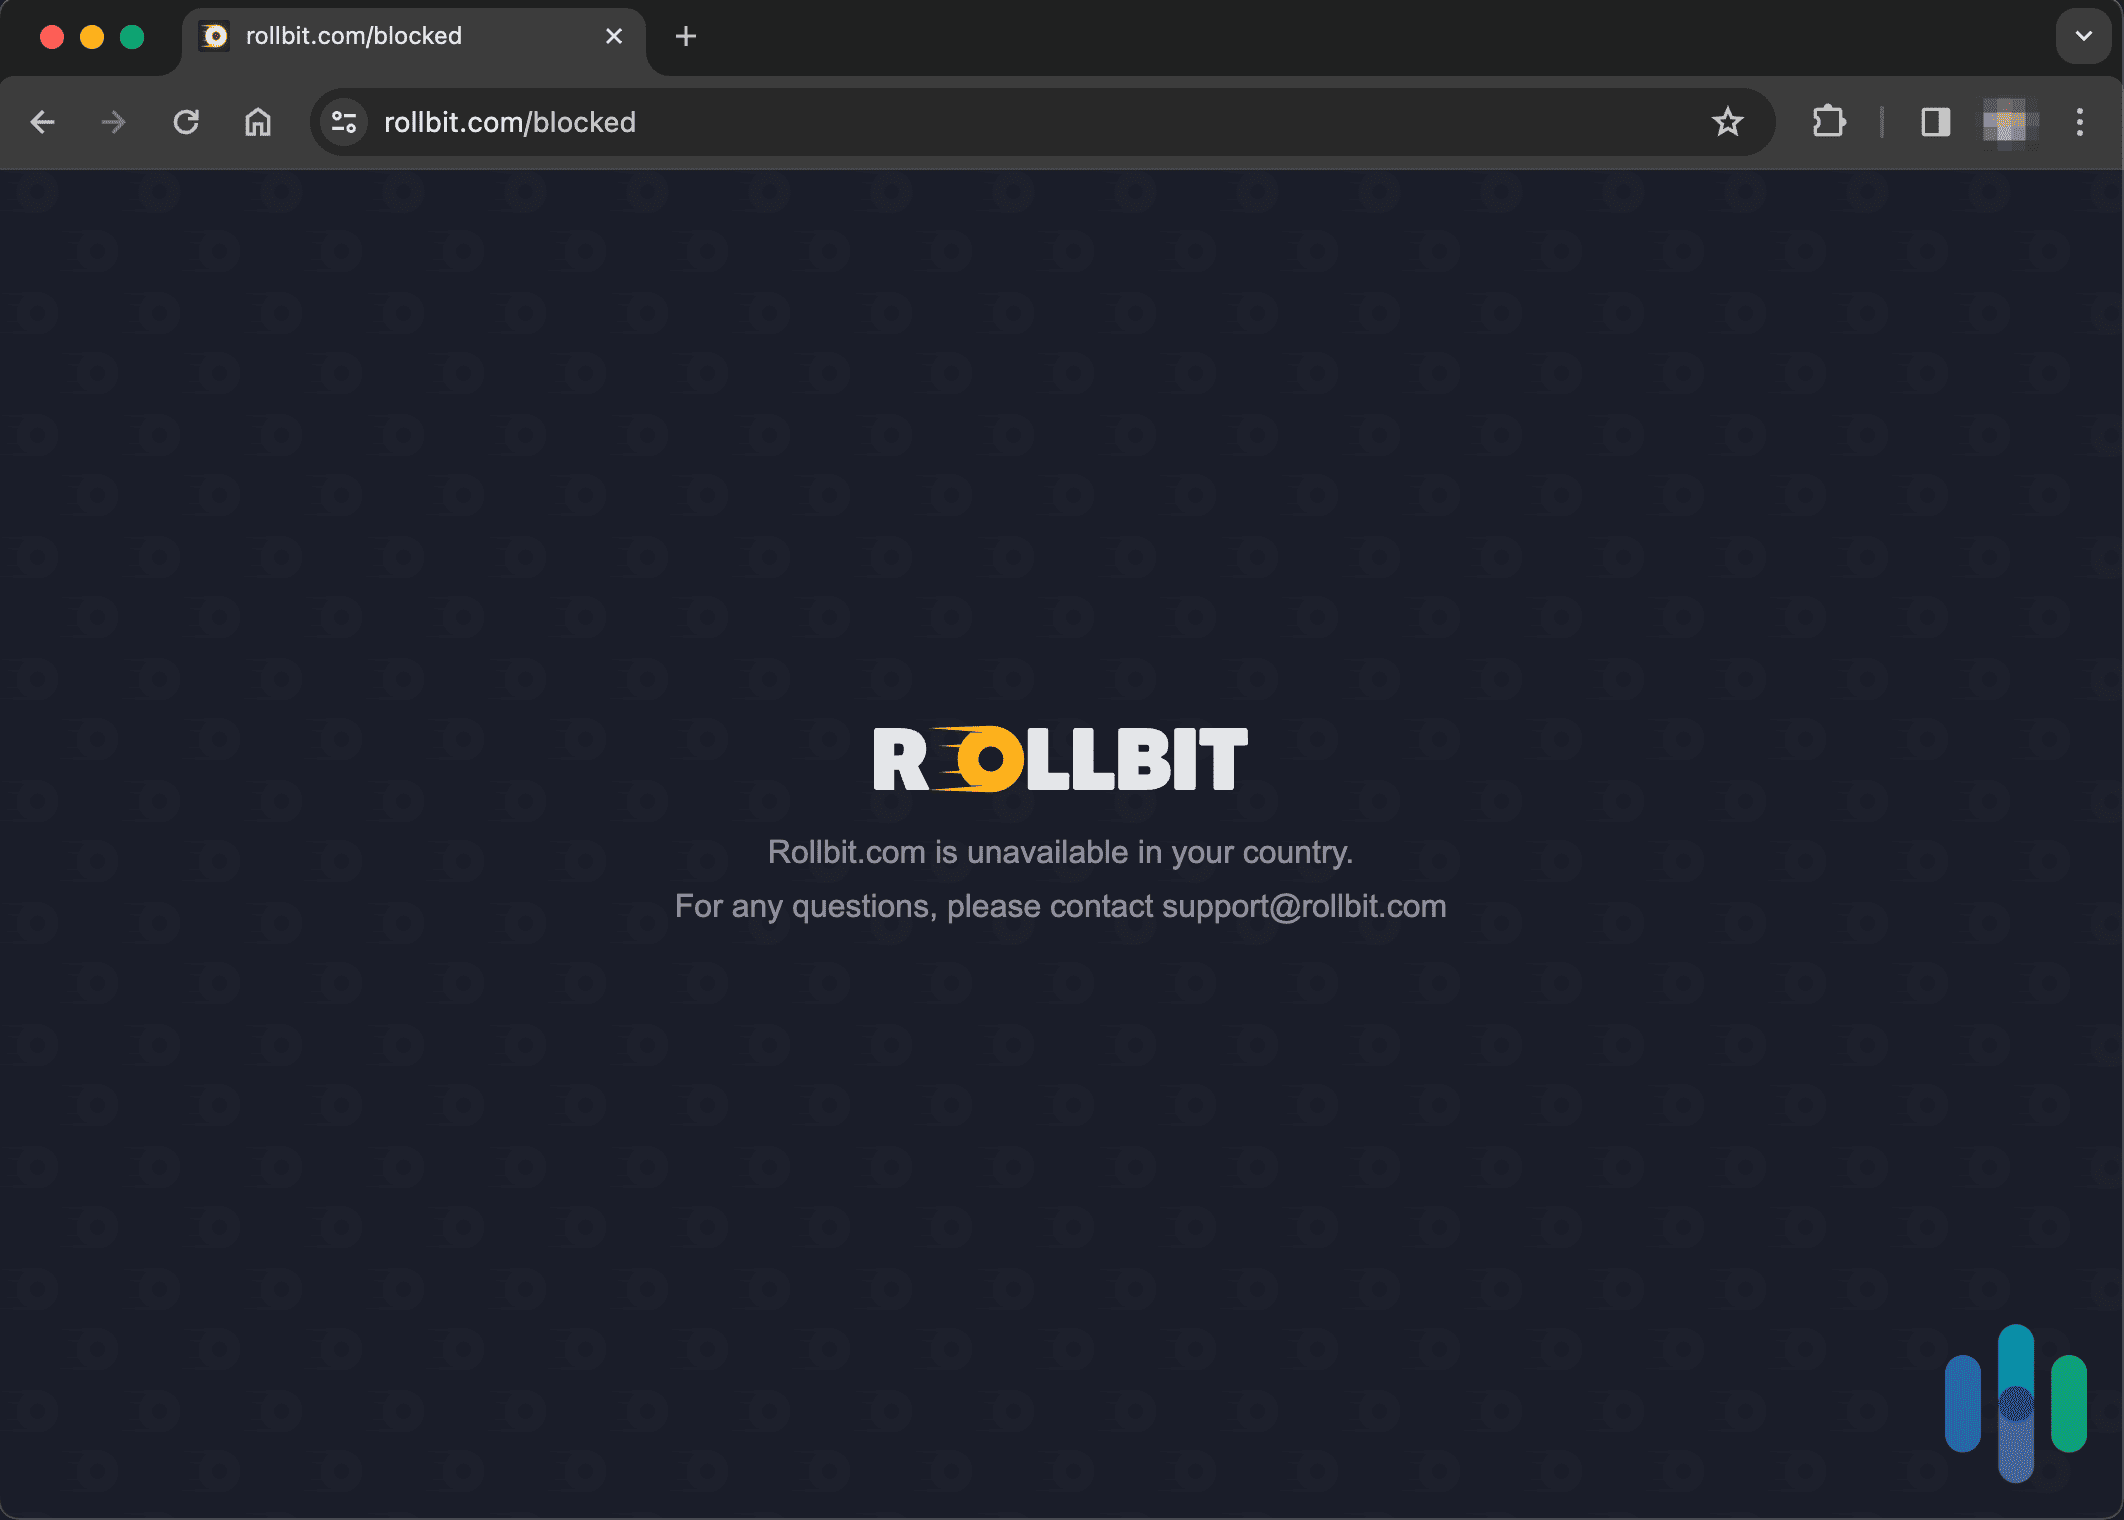 Trading crypto with sites like Rollbit will block you in certain countries